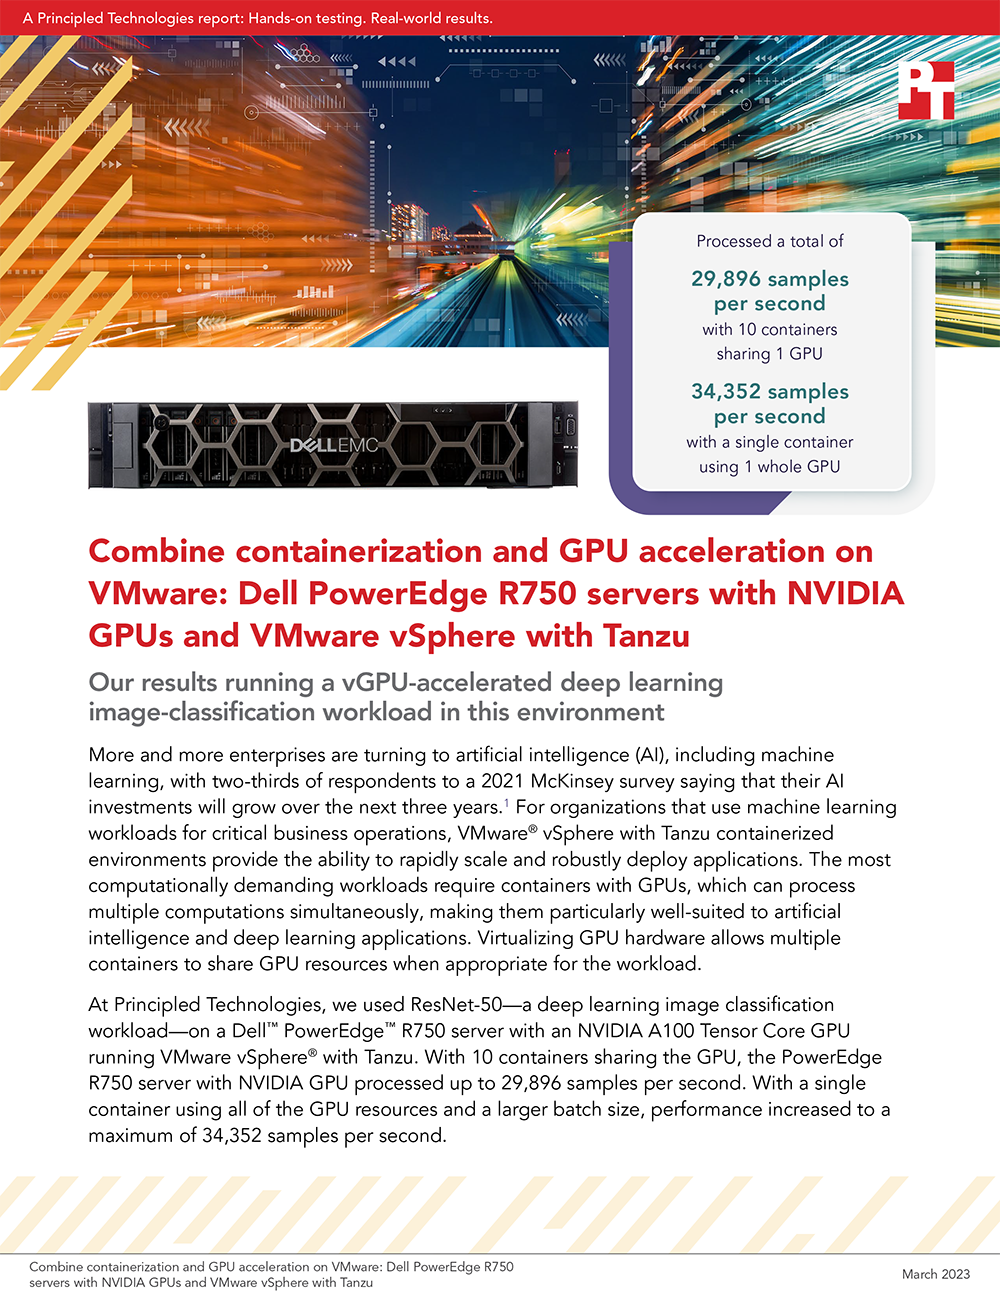 Combine containerization and GPU acceleration on VMware: Dell PowerEdge R750 servers with NVIDIA GPUs and VMware vSphere with Tanzu